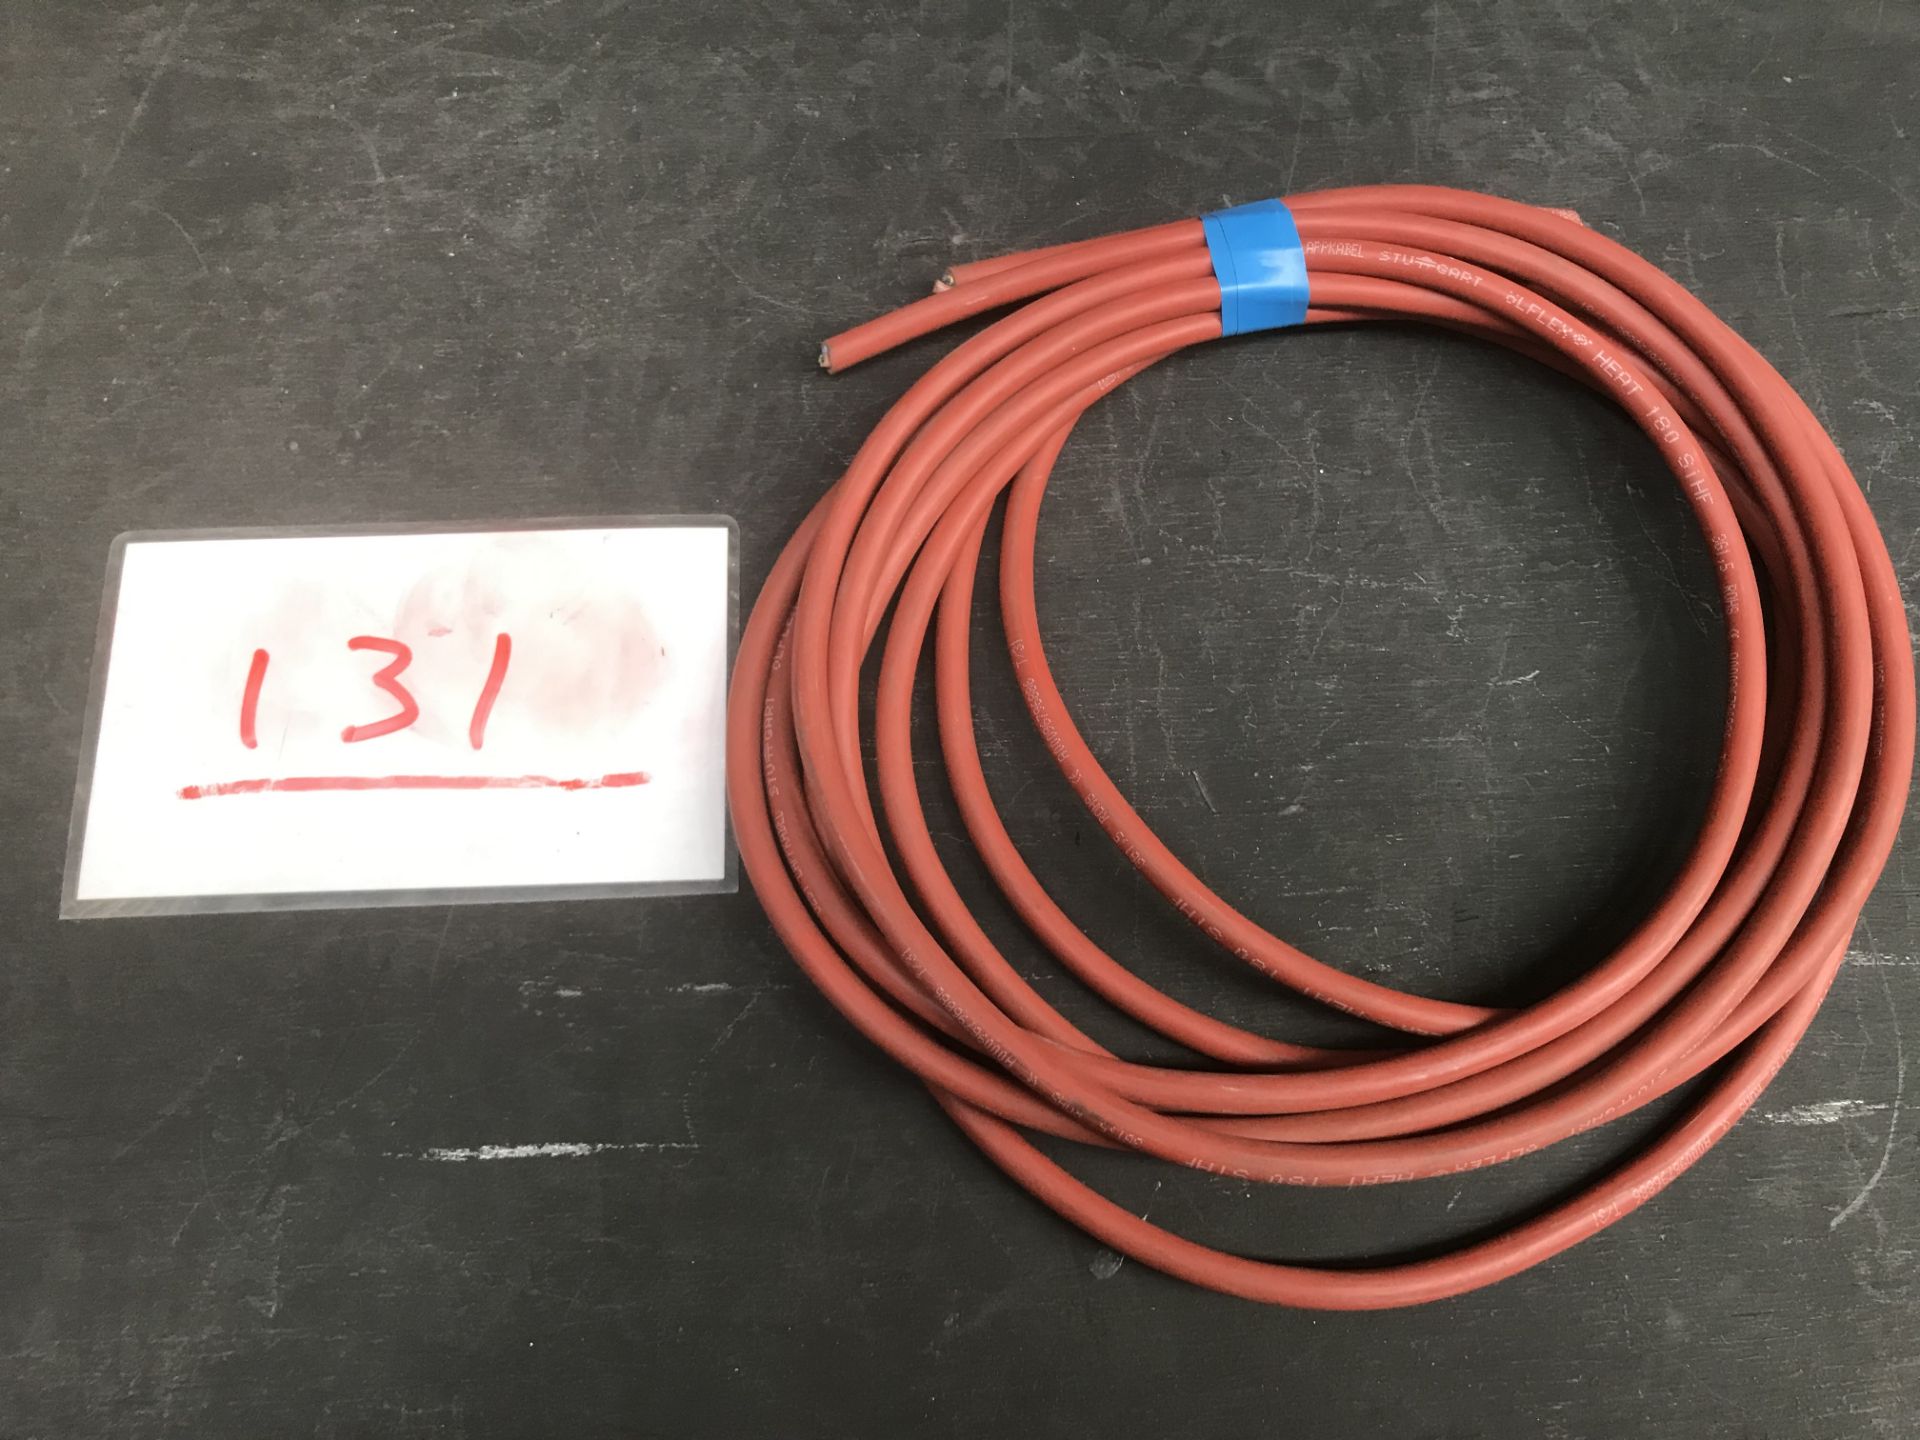 2 lengths of high temperature flexible rubber cable